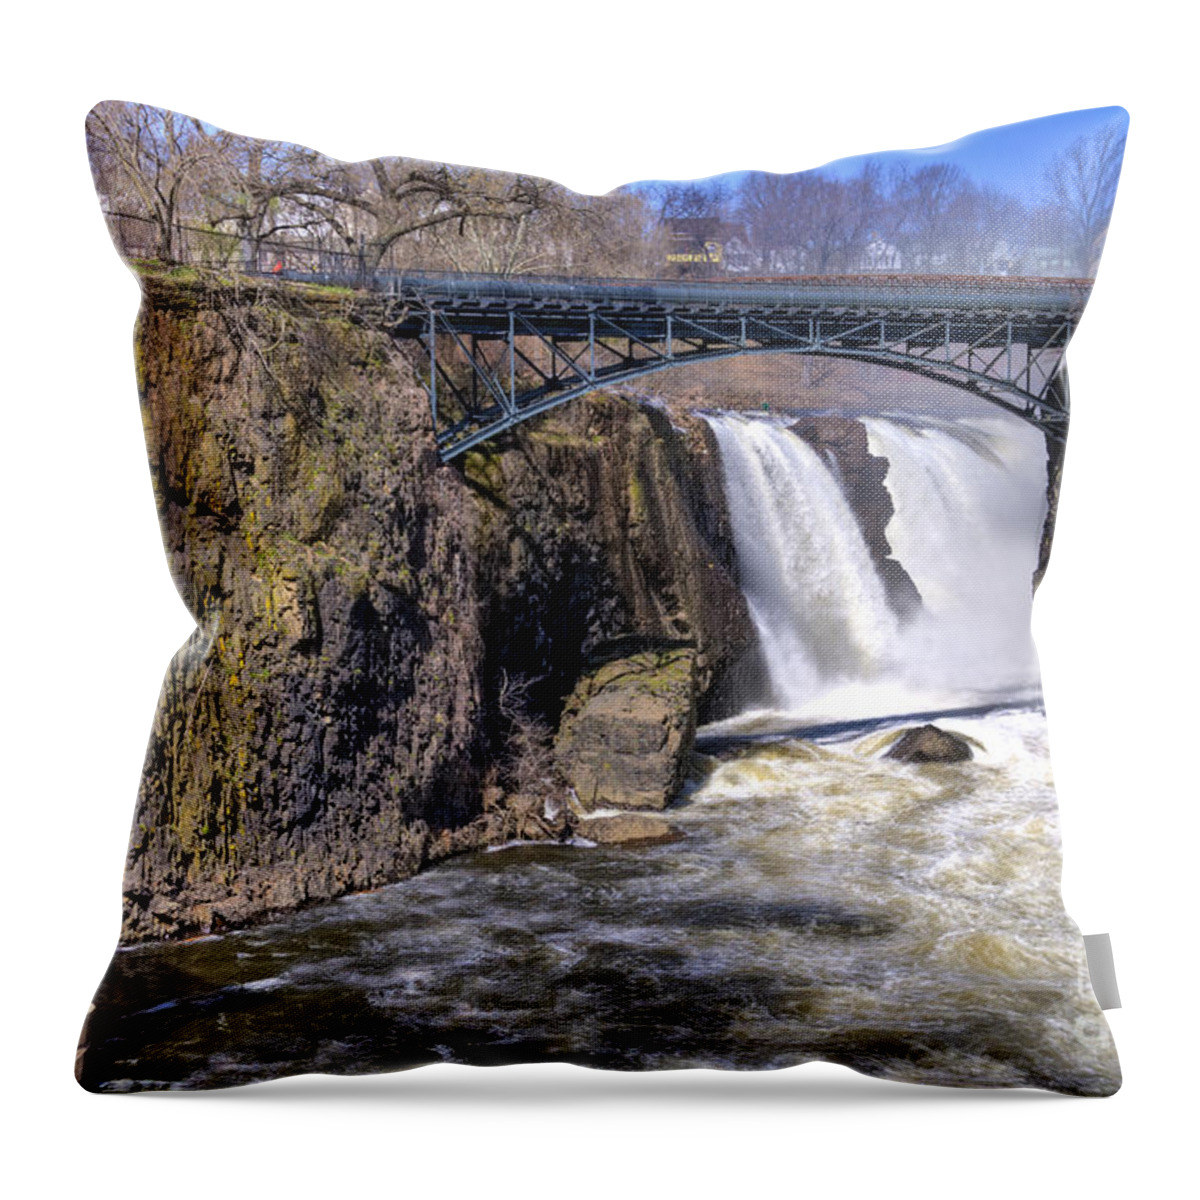 Great Falls Paterson Throw Pillow featuring the photograph The Great Falls by Anthony Sacco